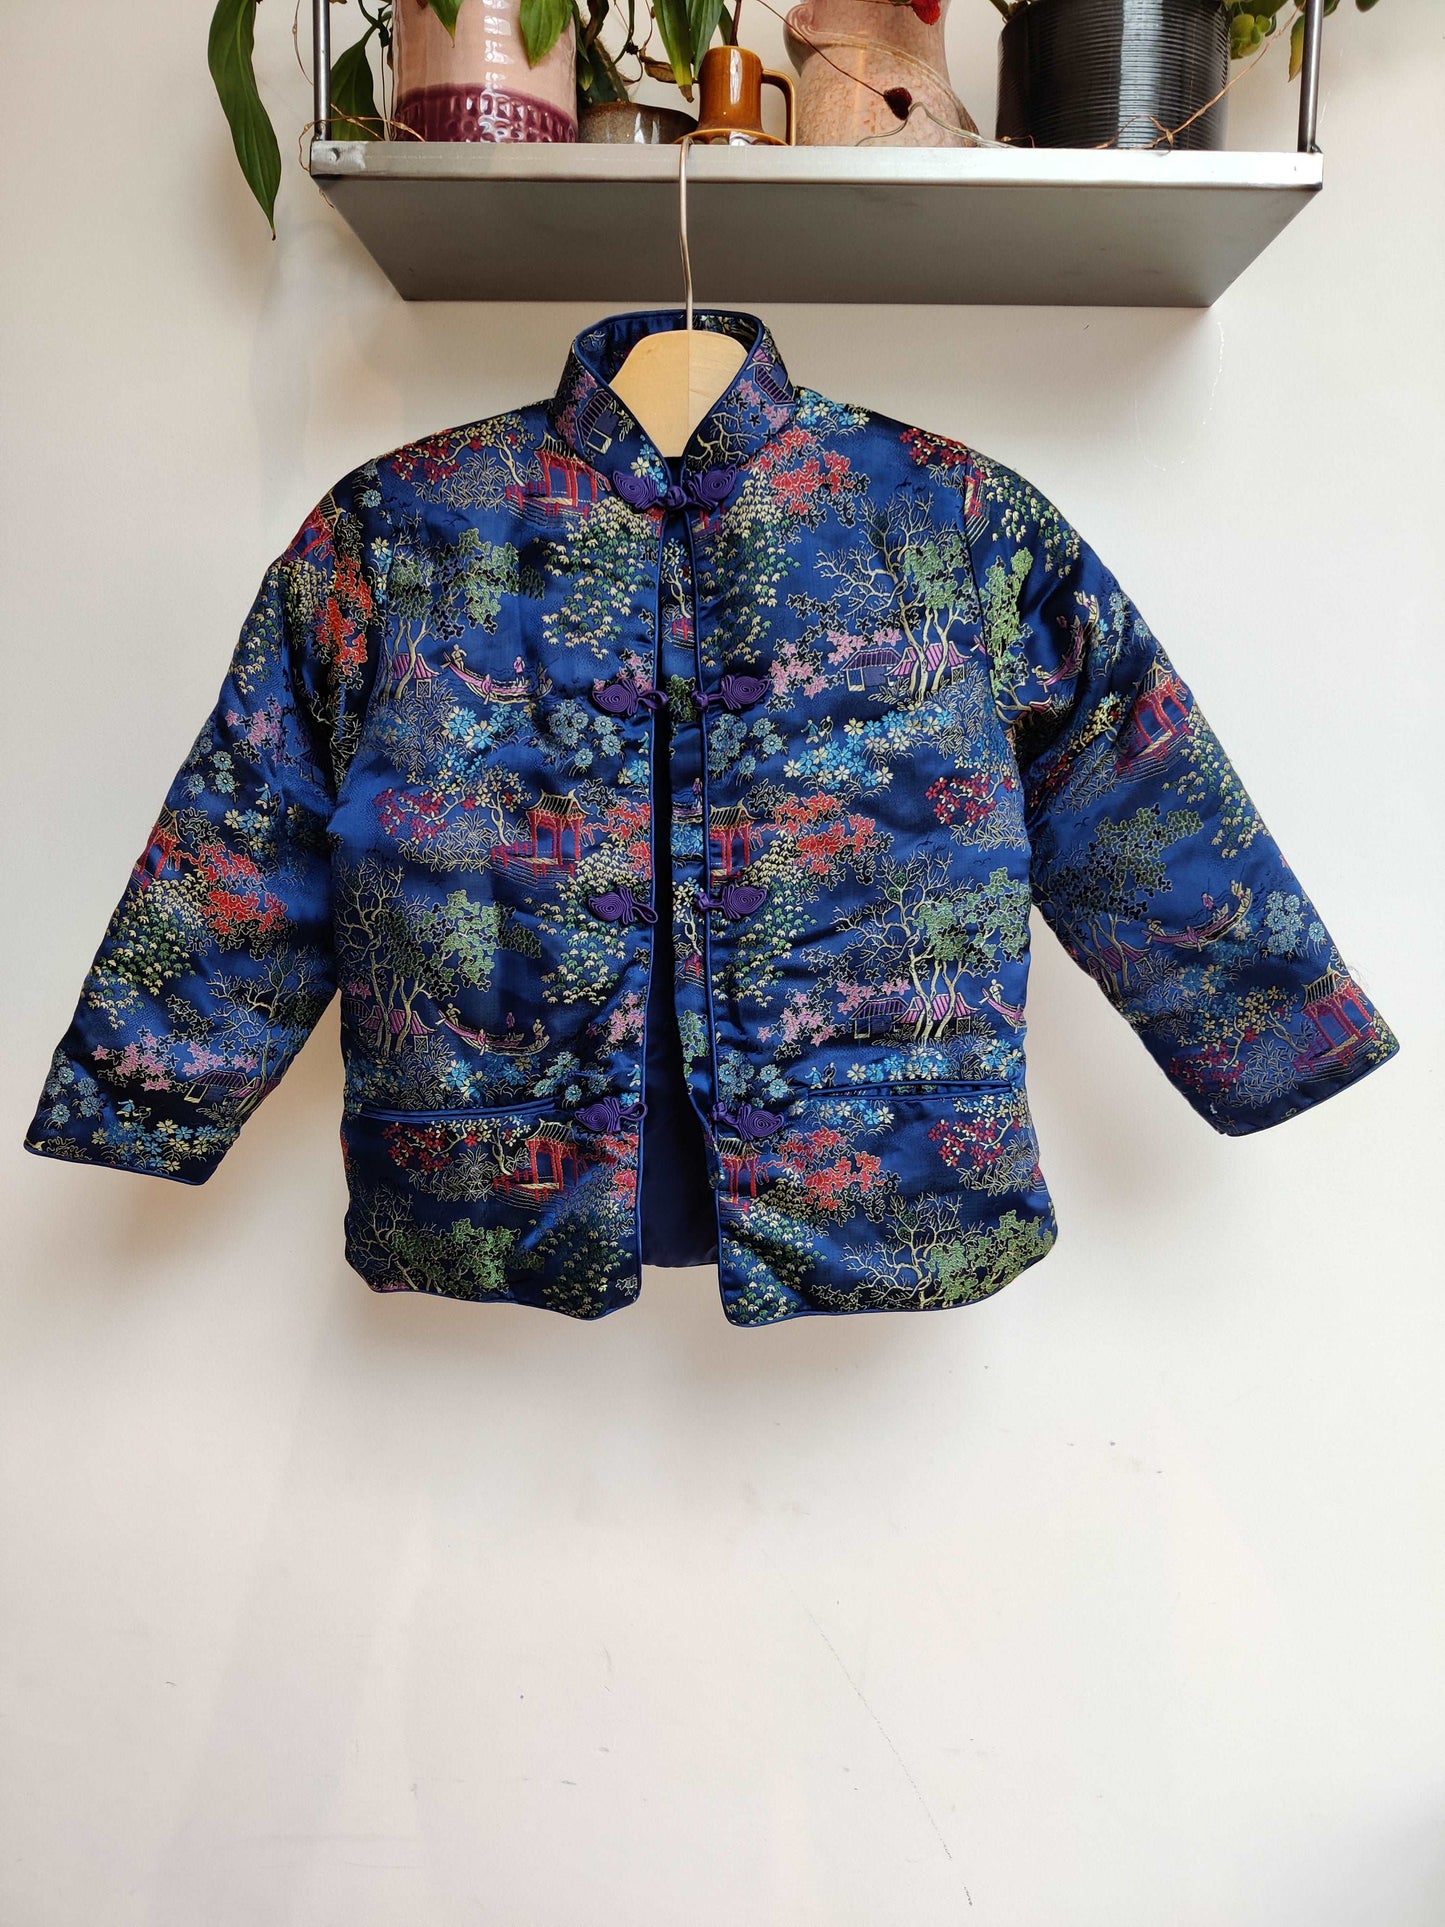 Child's blue Chinese jacket with Mandarin collar. Age 4.